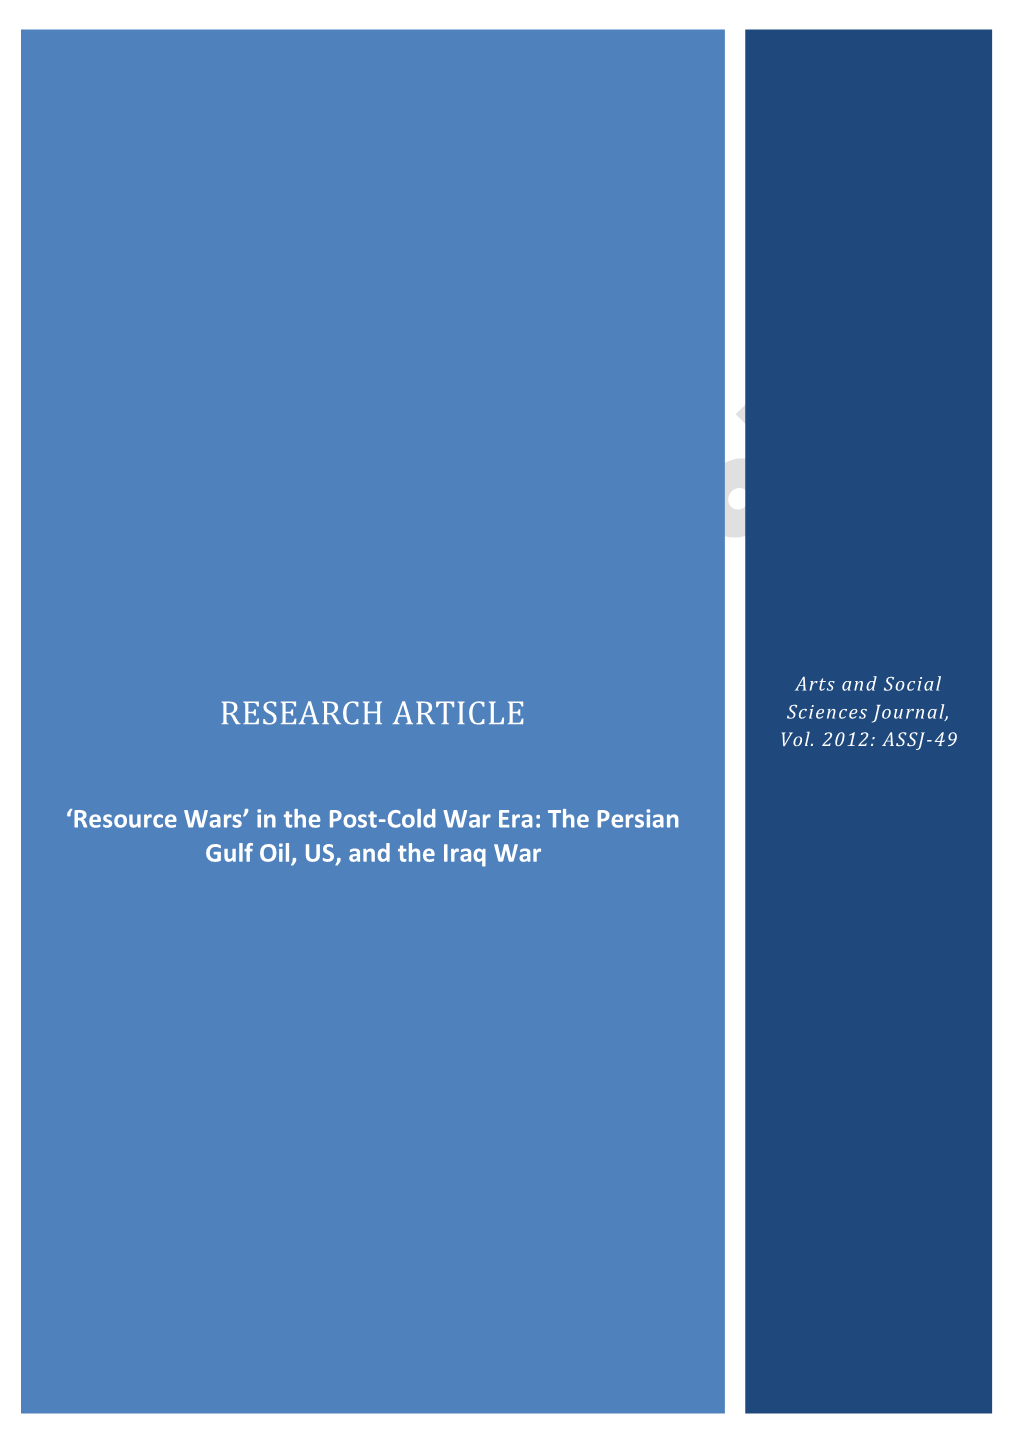 In the Post-Cold War Era: the Persian Gulf Oil, US, and the Iraq War Arts and Social Sciences Journal, Vol